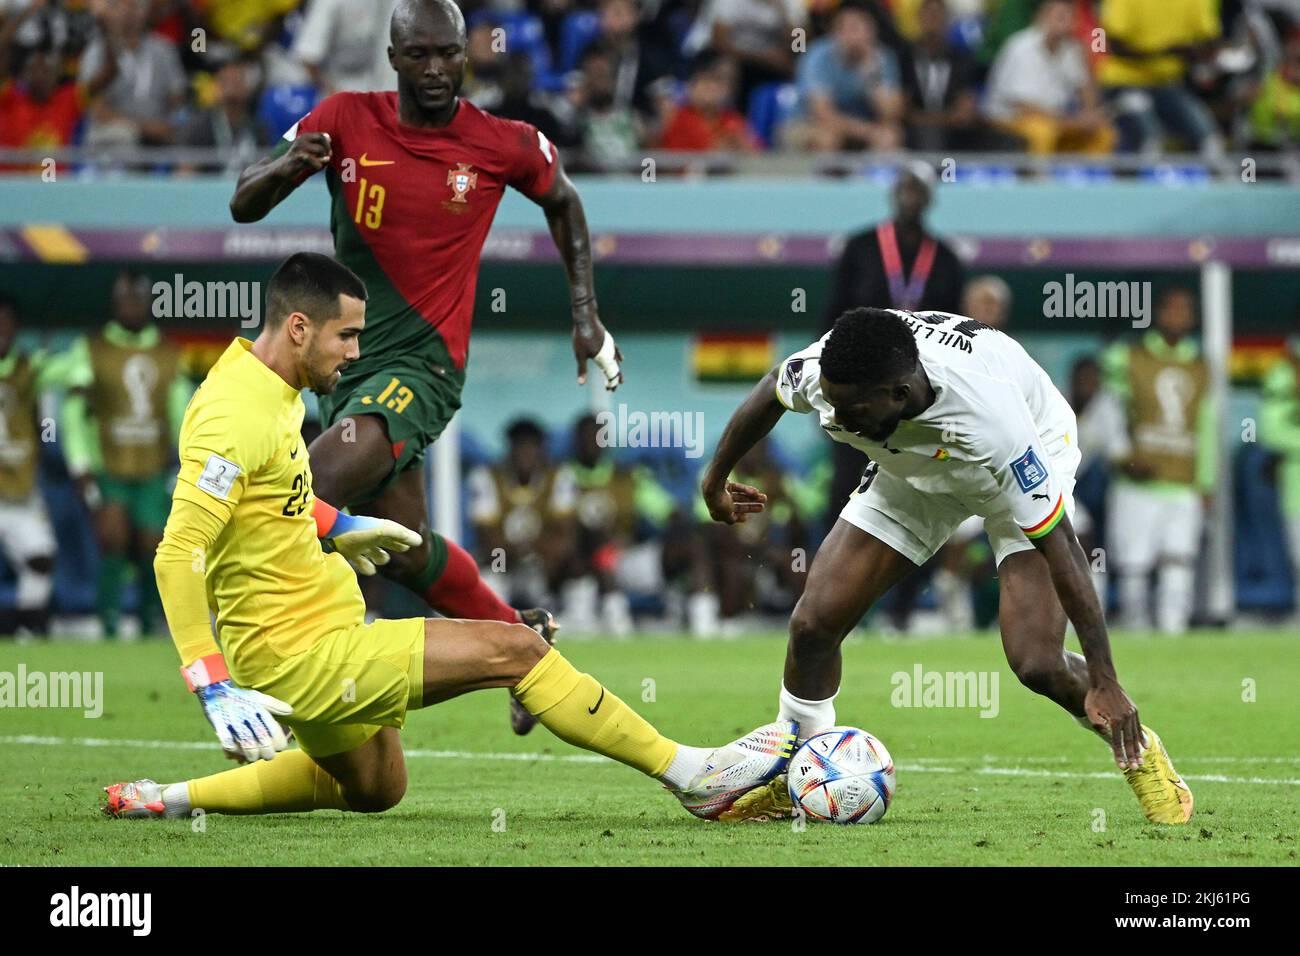 Doha, Qatar. 24th Nov, 2022. Diogo Costa (L), goalkeeper of Portugal, competes with Inaki Williams (R) of Ghana during the Group H match between Portugal and Ghana at the 2022 FIFA World Cup at Ras Abu Aboud (974) Stadium in Doha, Qatar, Nov. 24, 2022. Credit: Li Ga/Xinhua/Alamy Live News Stock Photo